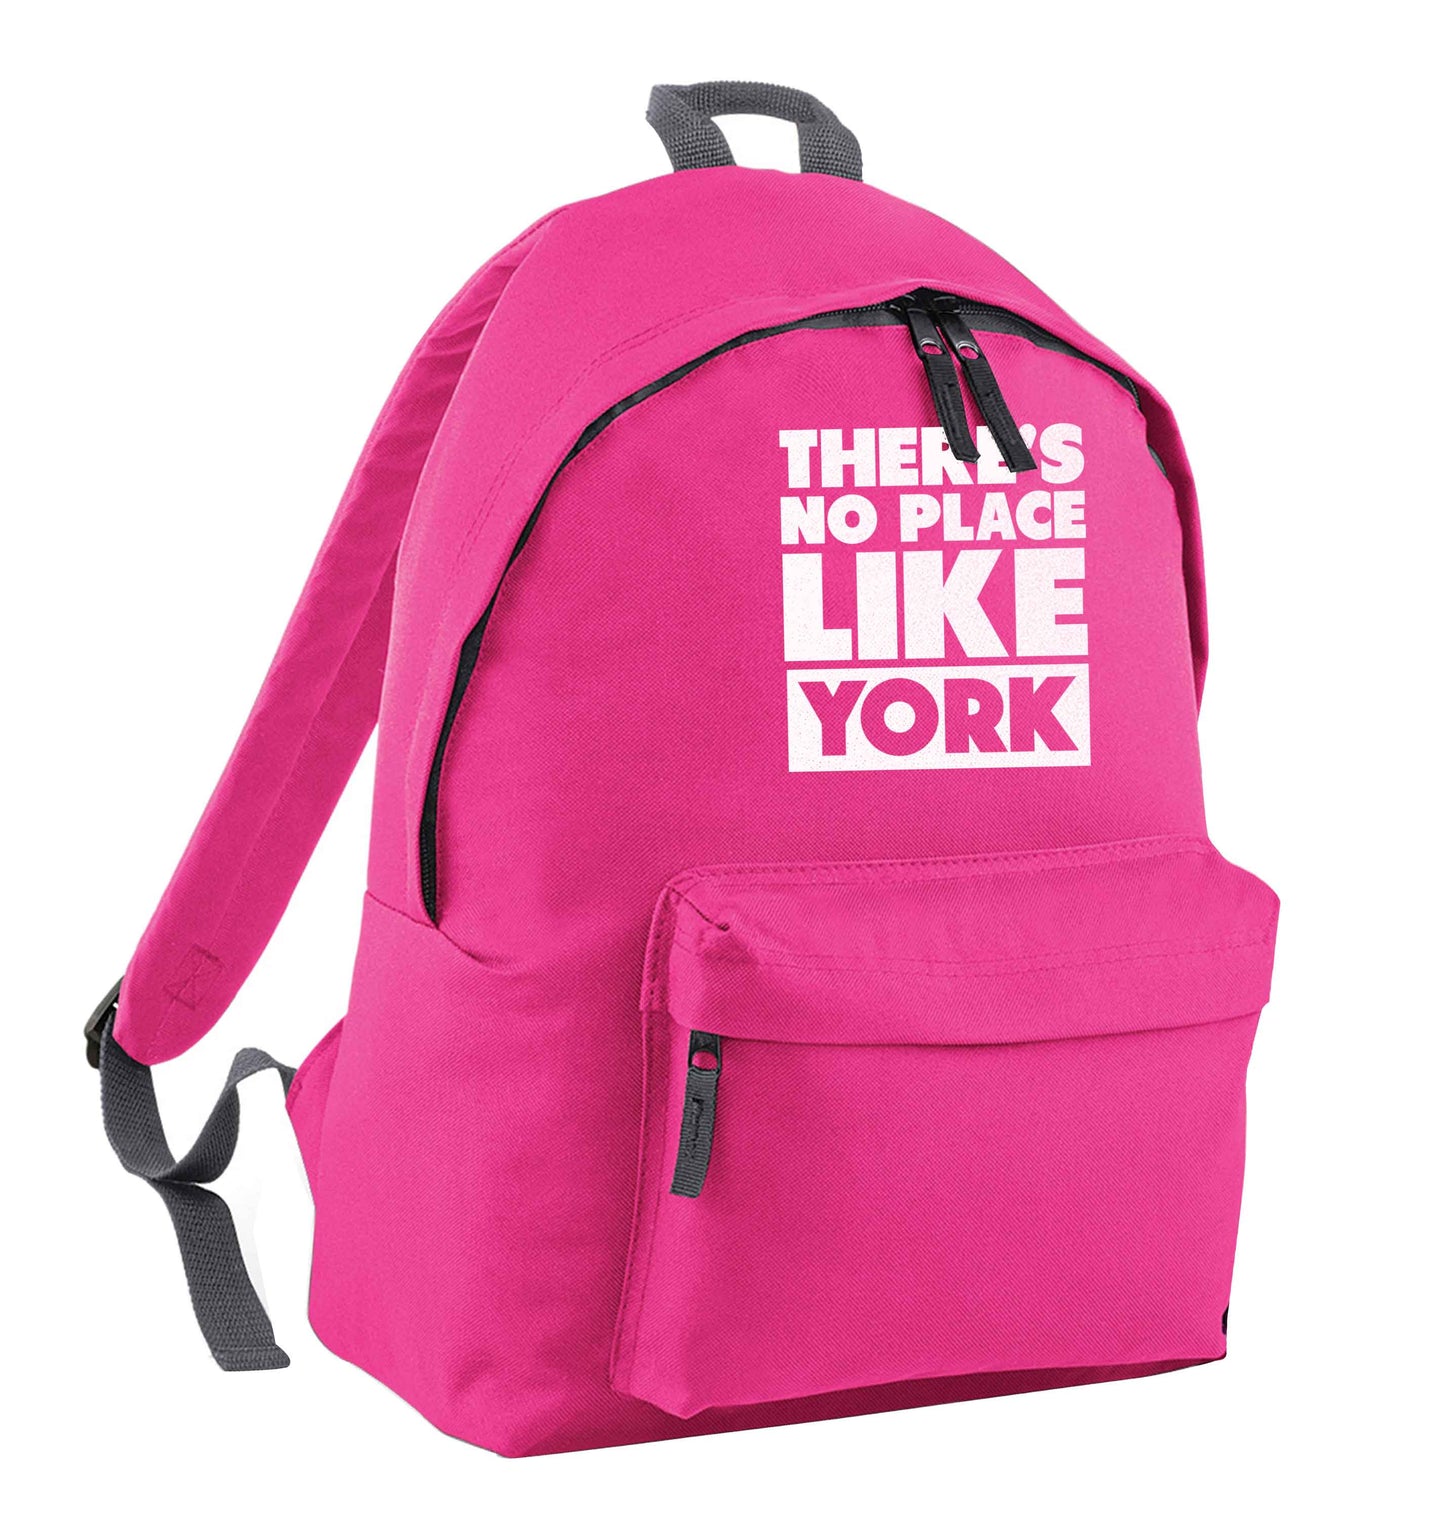 There's no place like york pink adults backpack